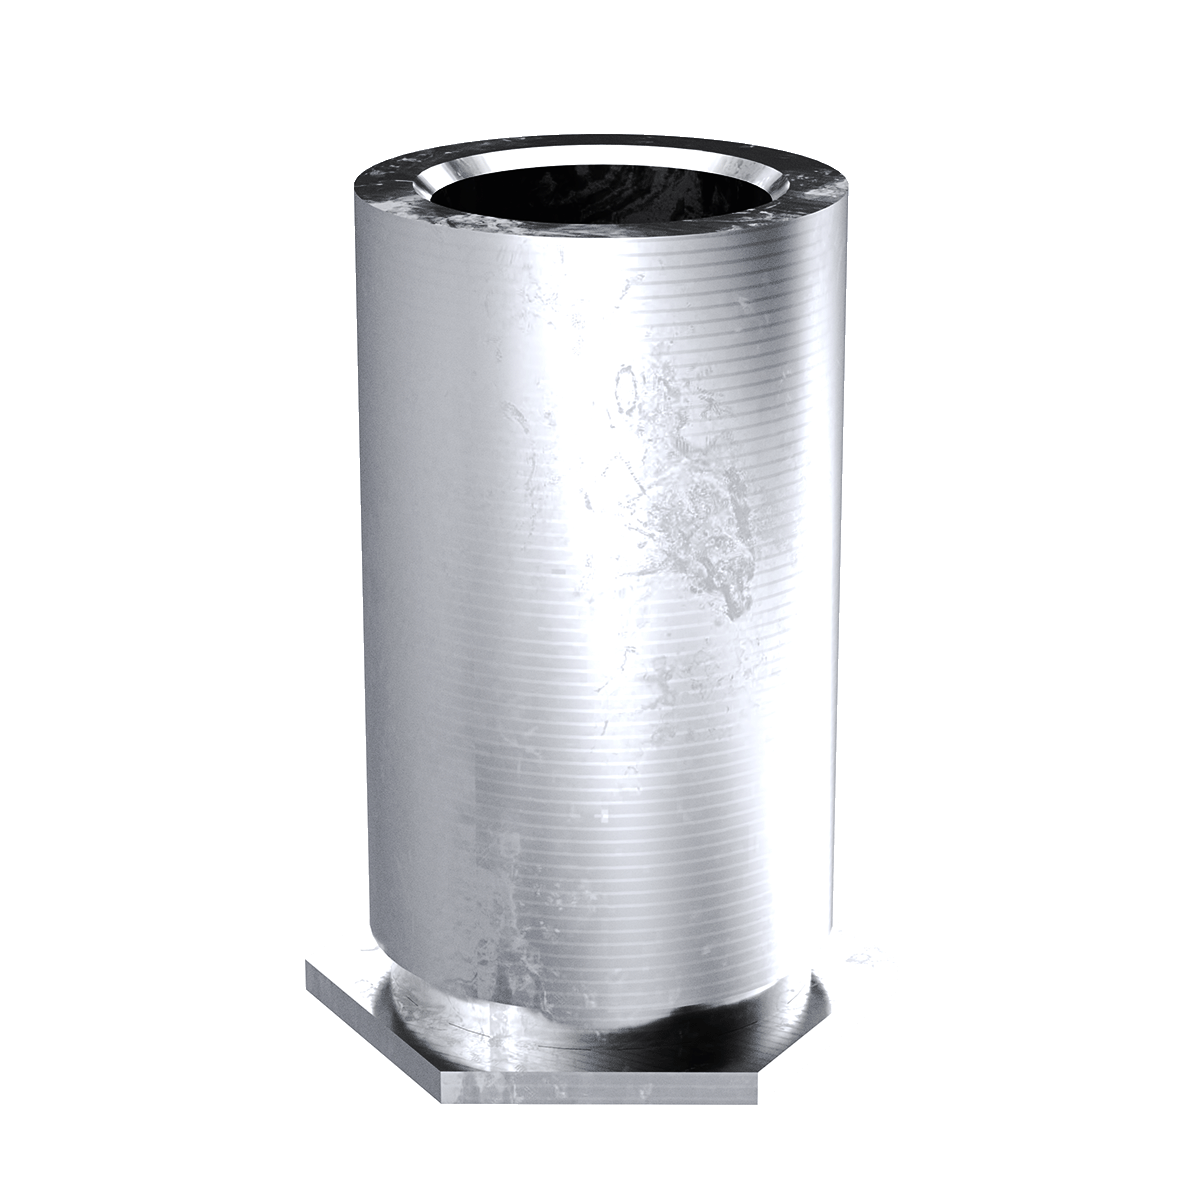 Self-Clinching Standoff, Through Unthreaded, 300 Series Stainless Steel, Passivated, 0.116 x 0.125, 100 Pack